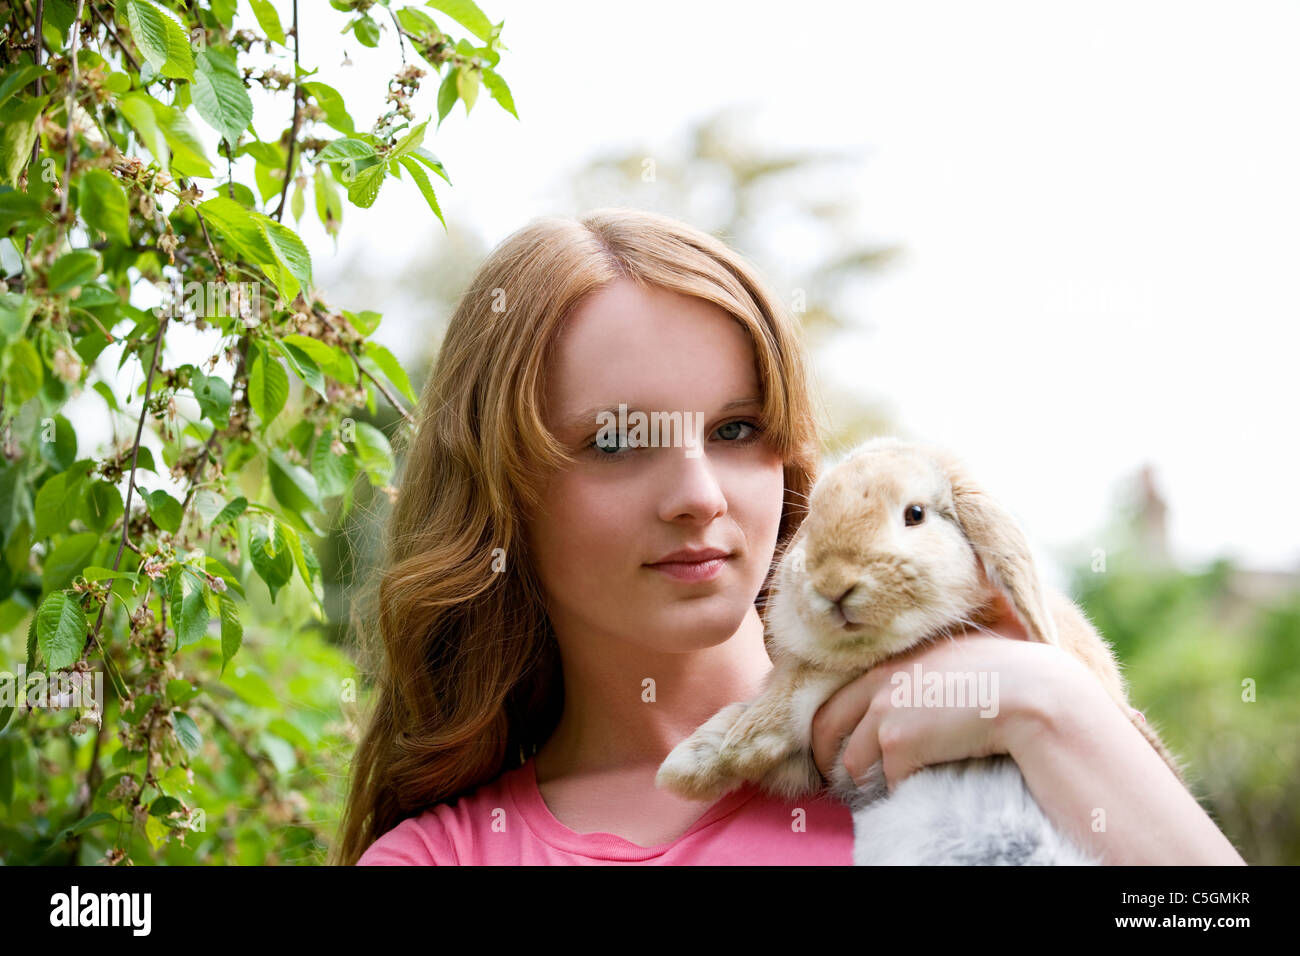 A young girl holding her pet rabbit Stock Photo